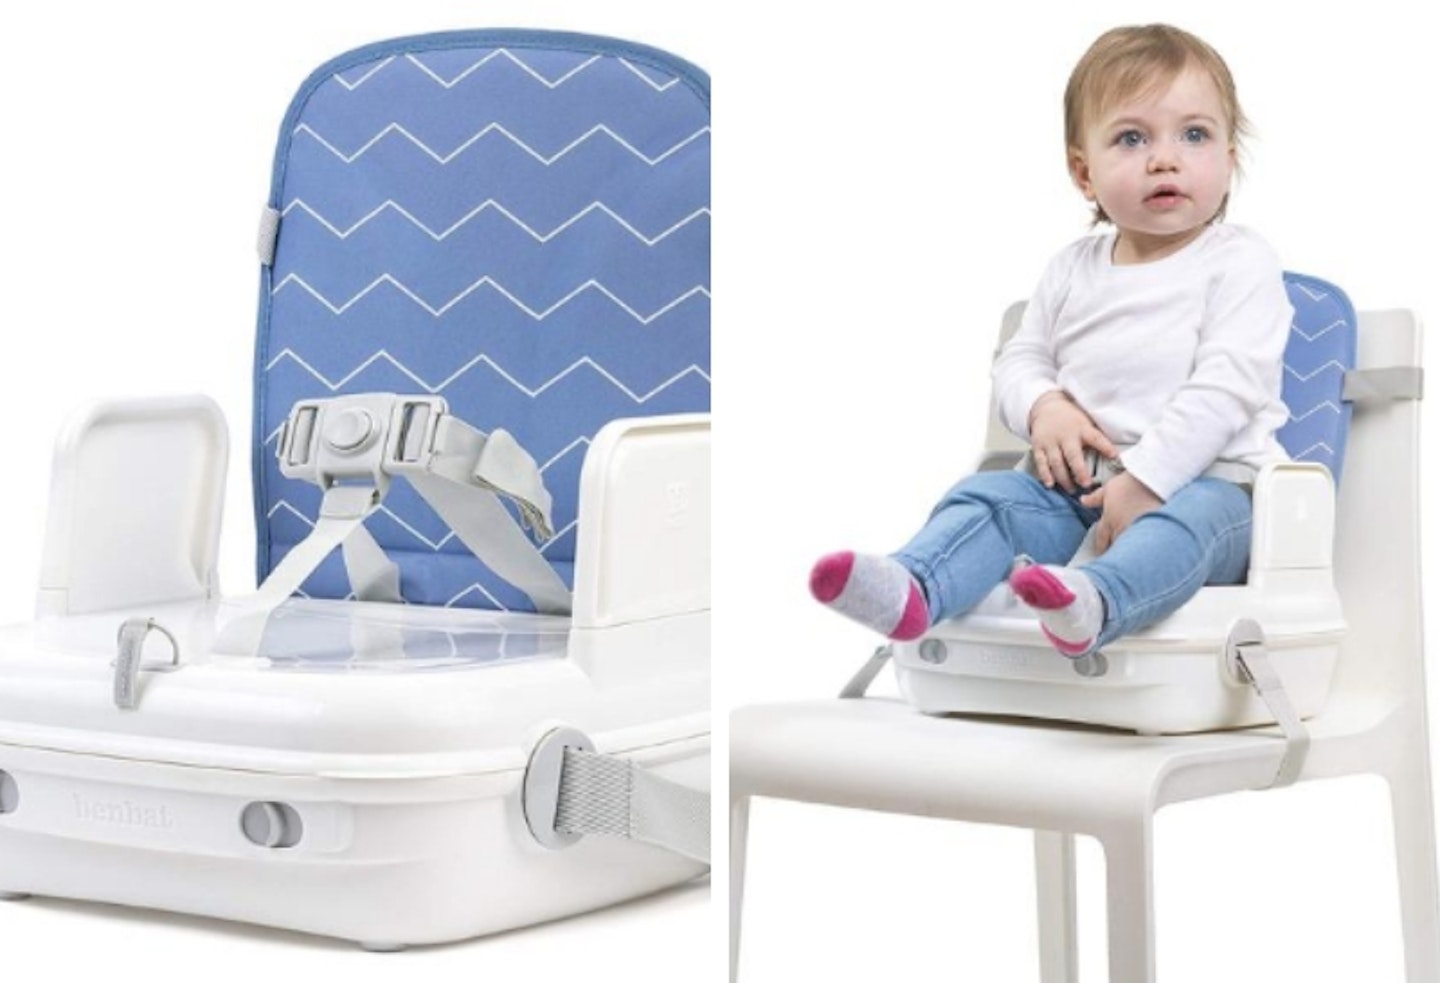 Yummigo2 Feed & Go Booster Seat review